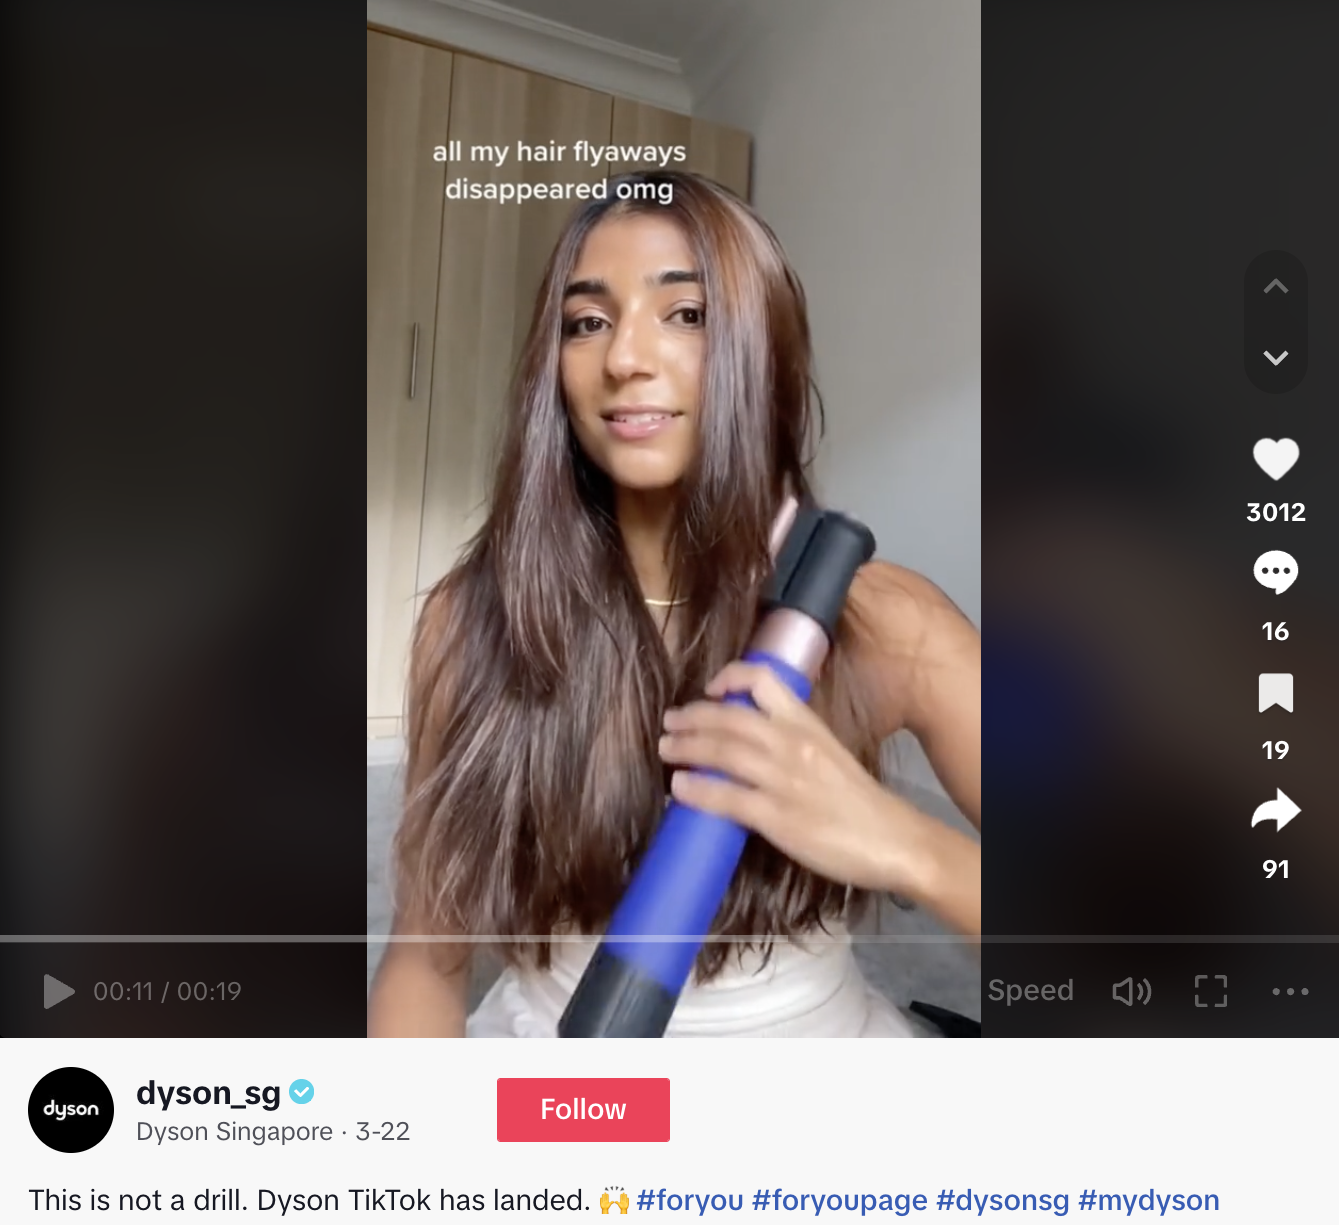 A TikTok video from Dyson Singapore featuring several user reviews. The caption reads, "This is not a drill. Dyson TikTok has landed."